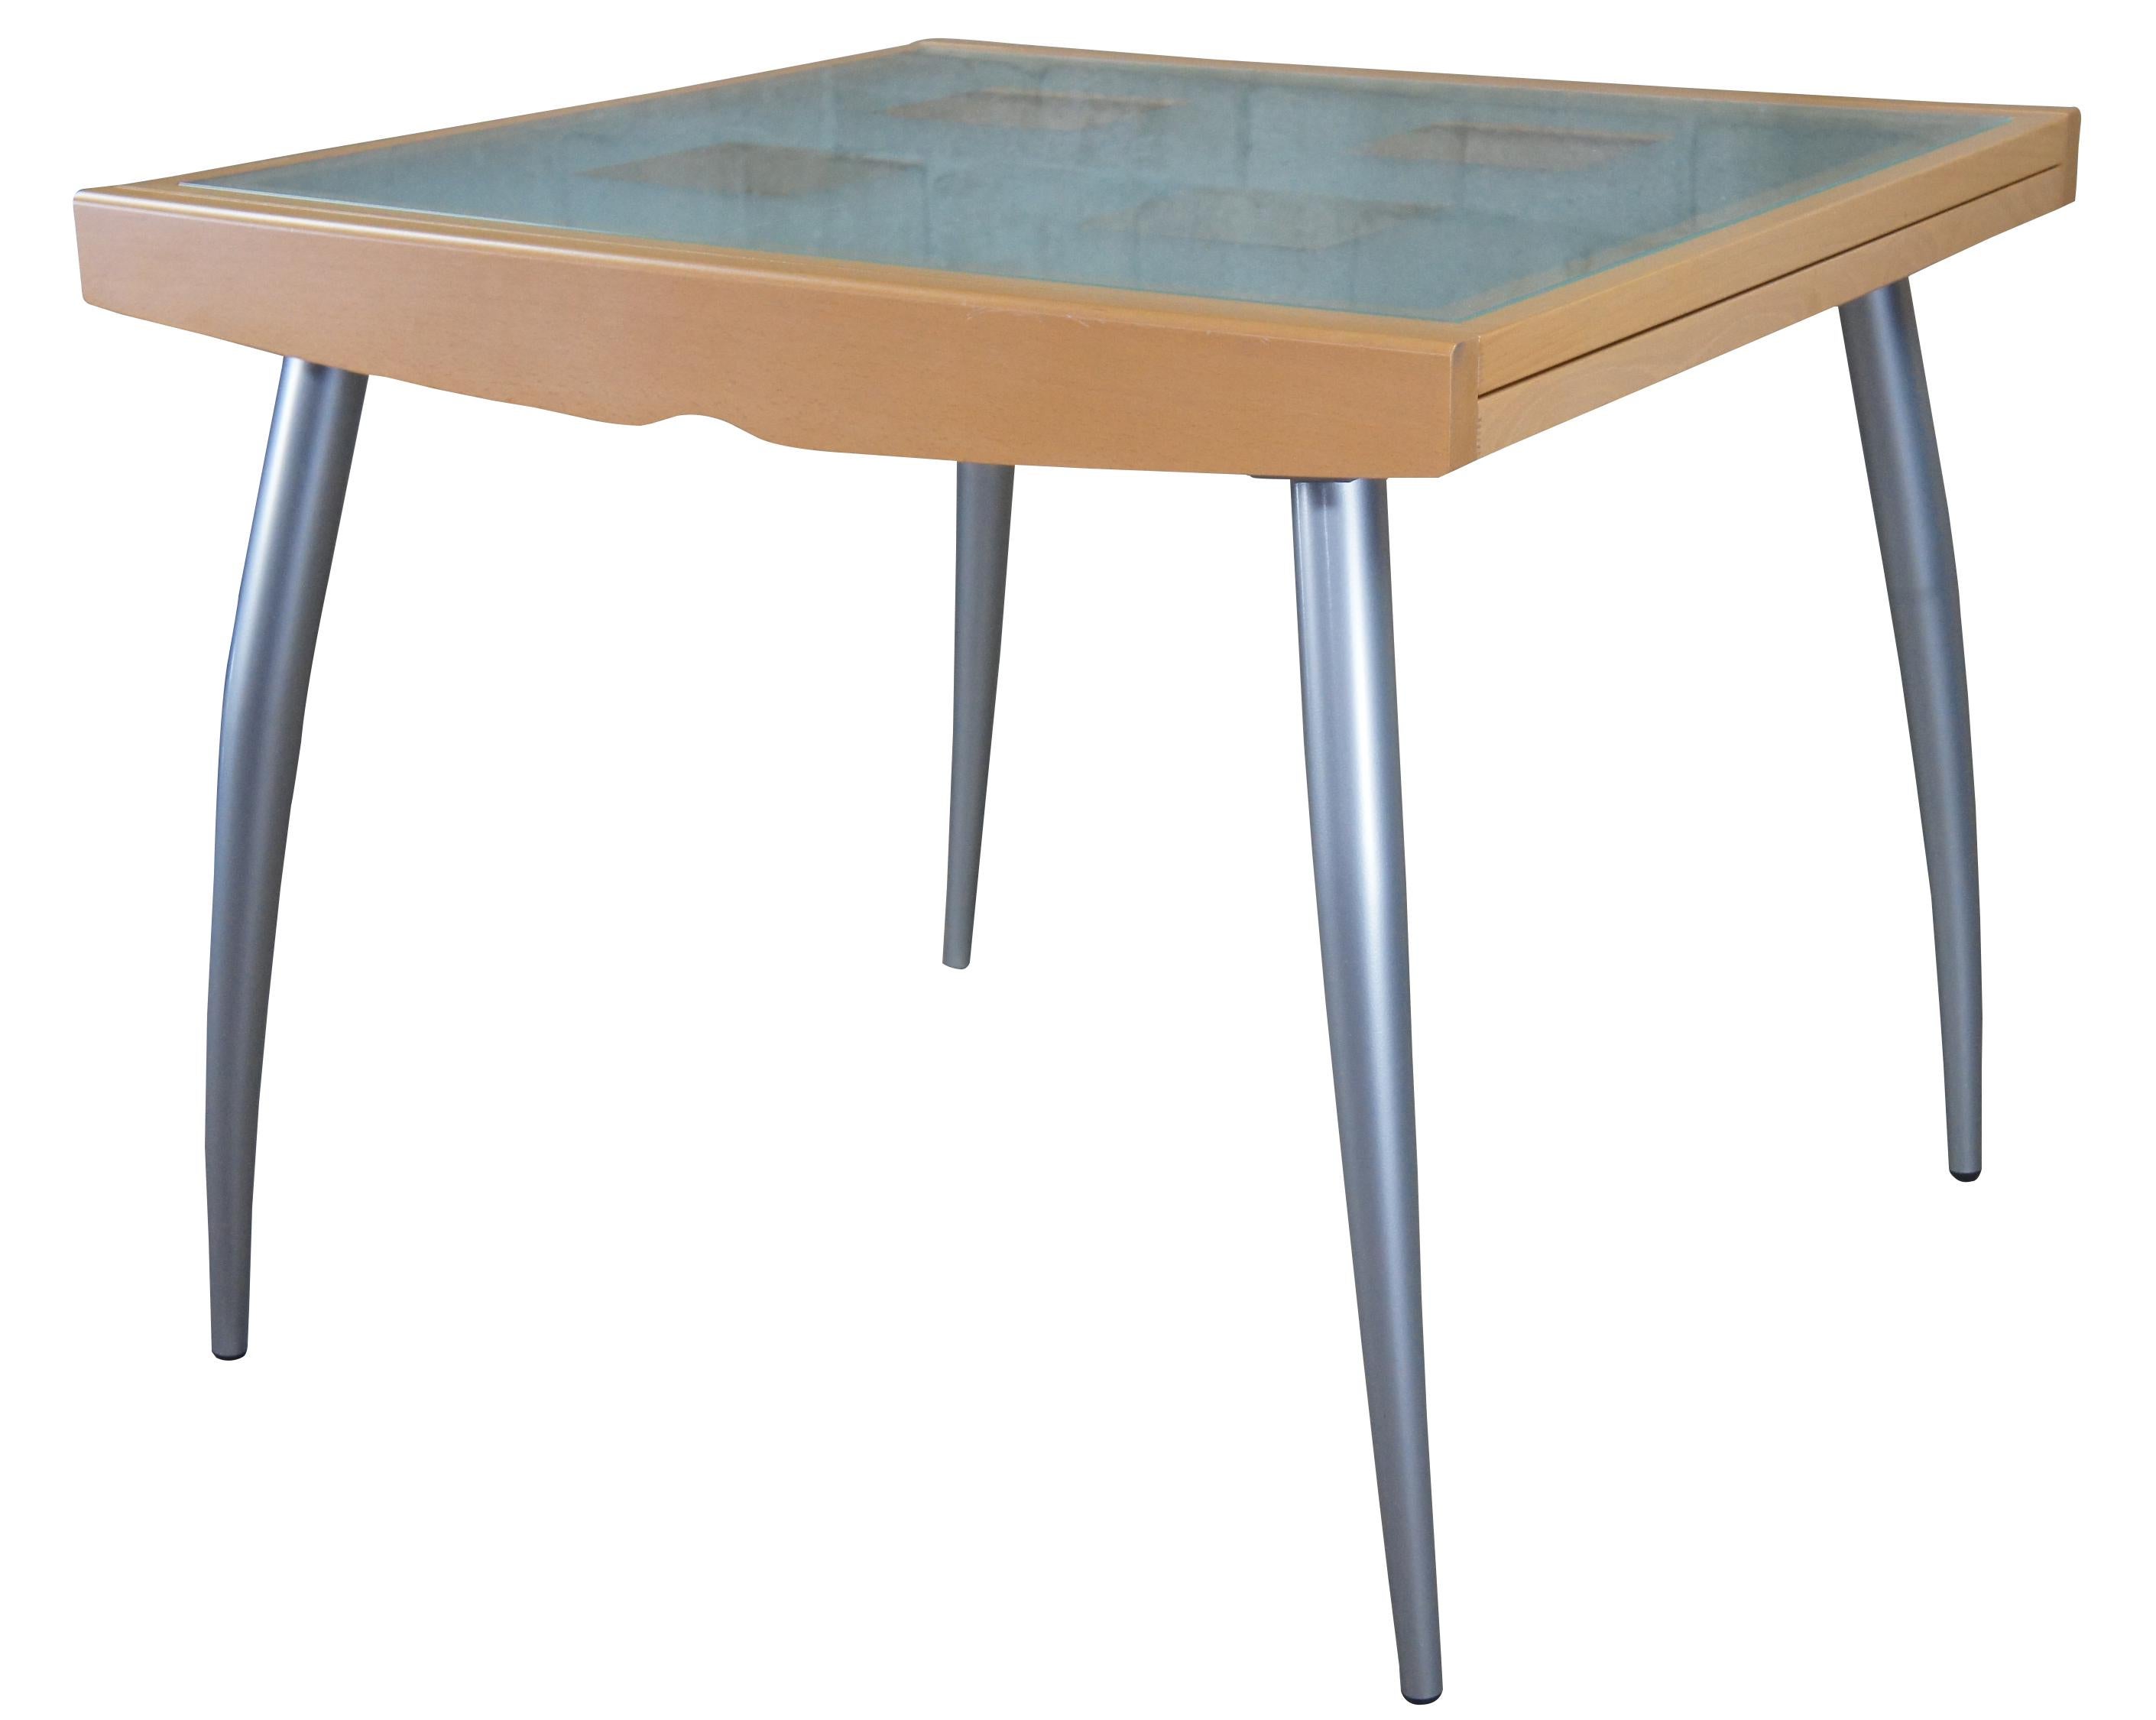 Calligaris 'Bon Ton' extendable dining table or desk.
The table features a frame in solid wood with inset glass tops.